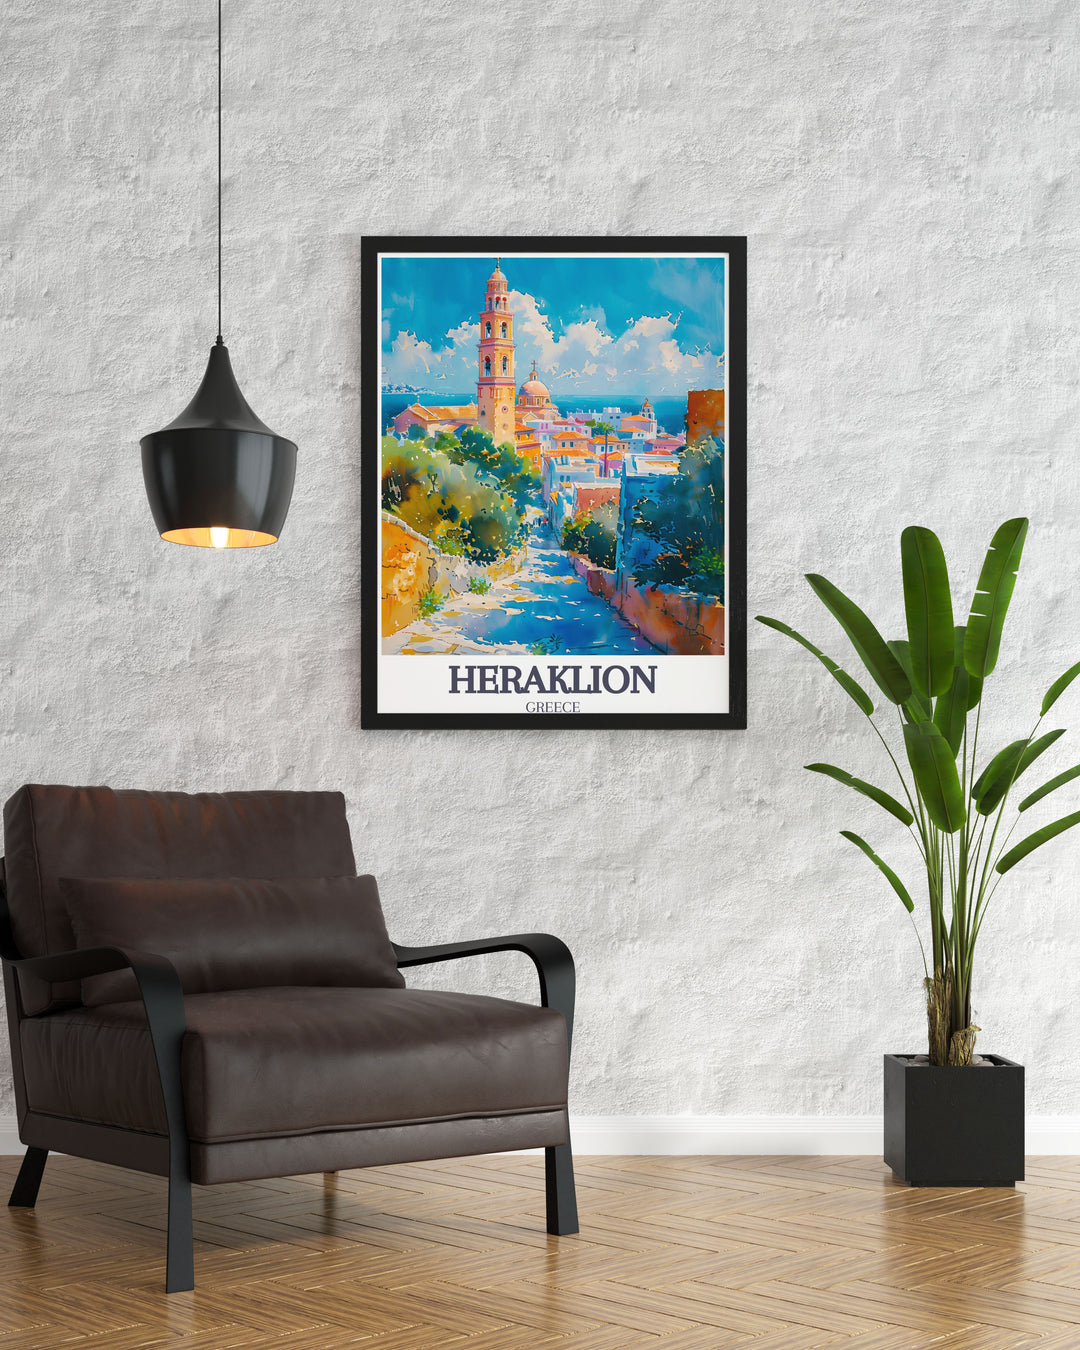 Gallery wall art of Heraklion, highlighting the serene beauty of Agios Minas Cathedral, Crete, Greece. This print features the cathedrals towering dome, intricate frescoes, and vibrant surroundings, offering a captivating depiction of Greek architectural heritage.